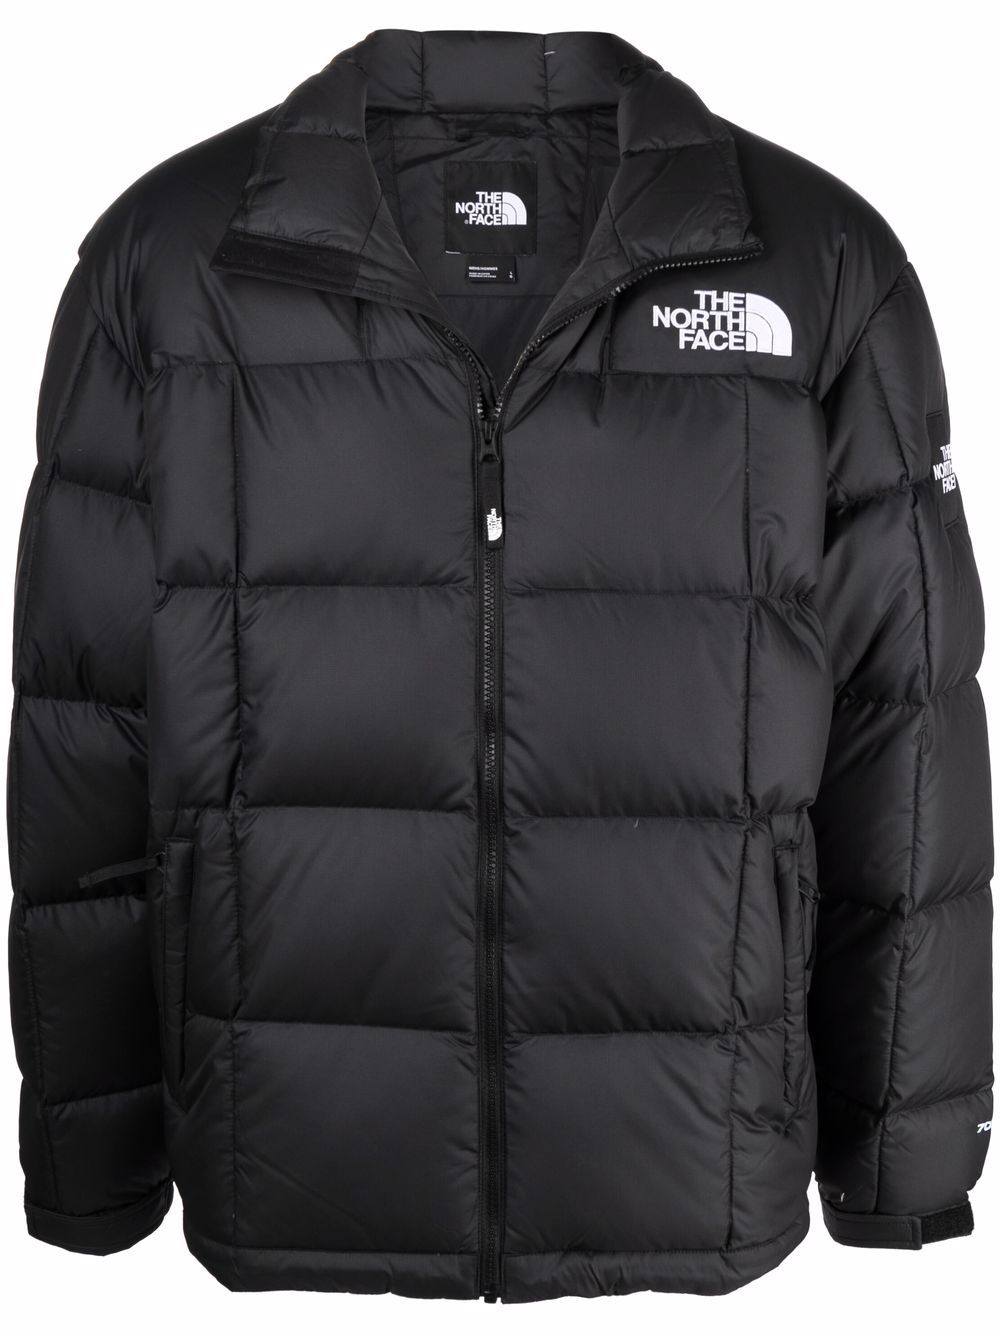 Doudoune North Face Homme 1996 Luxembourg, SAVE 41% 